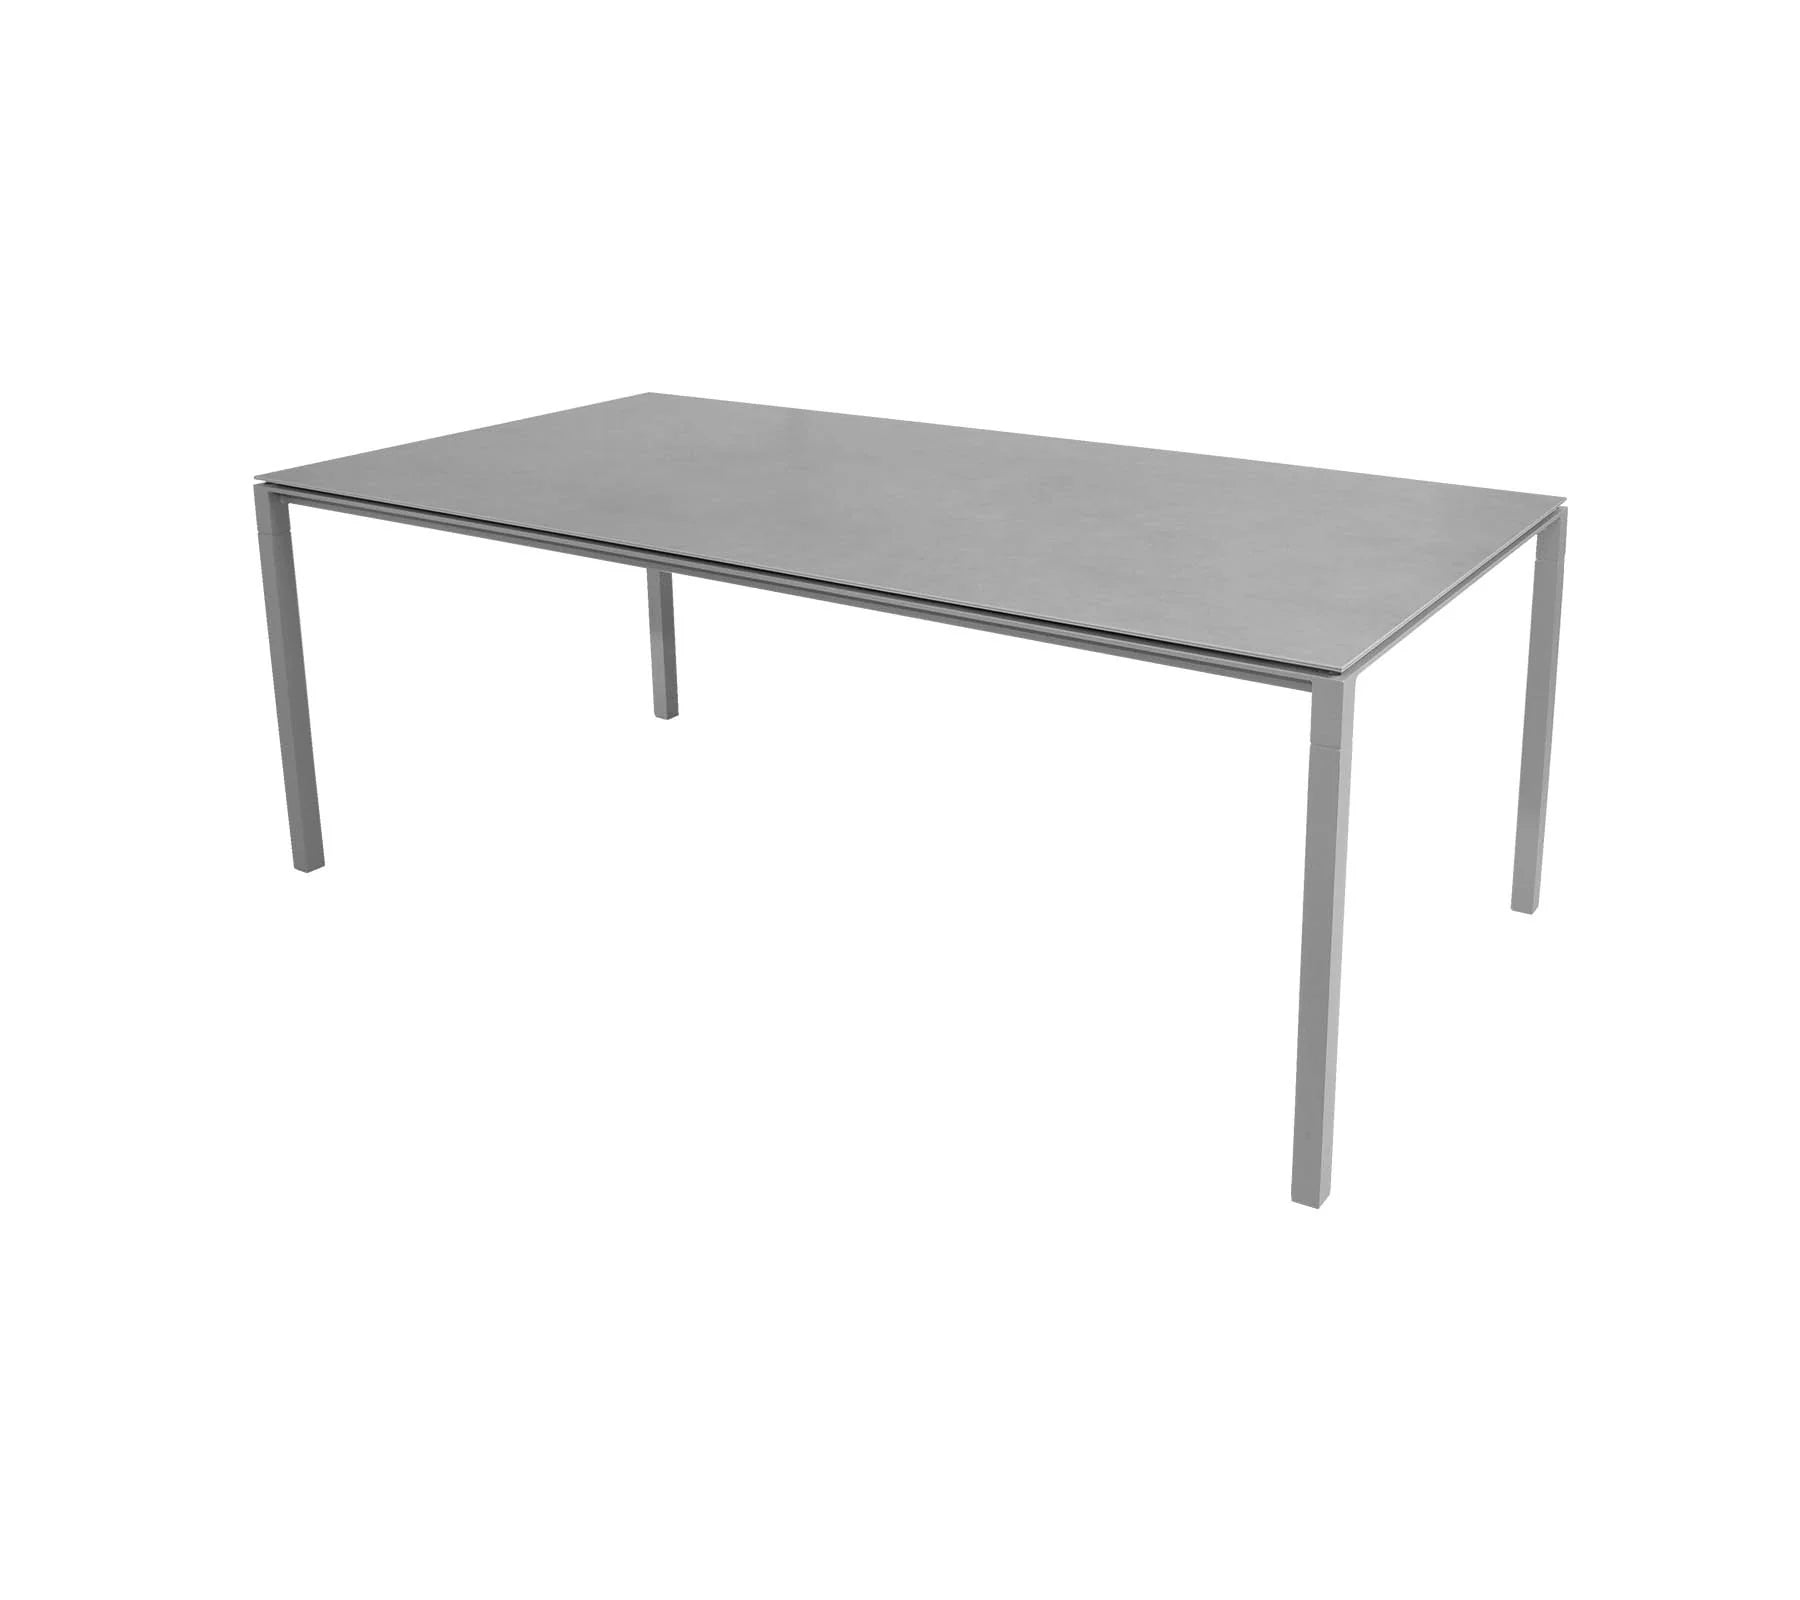 Boxhill's Pure light grey aluminum outdoor rectangular dining table with light grey table top on white background